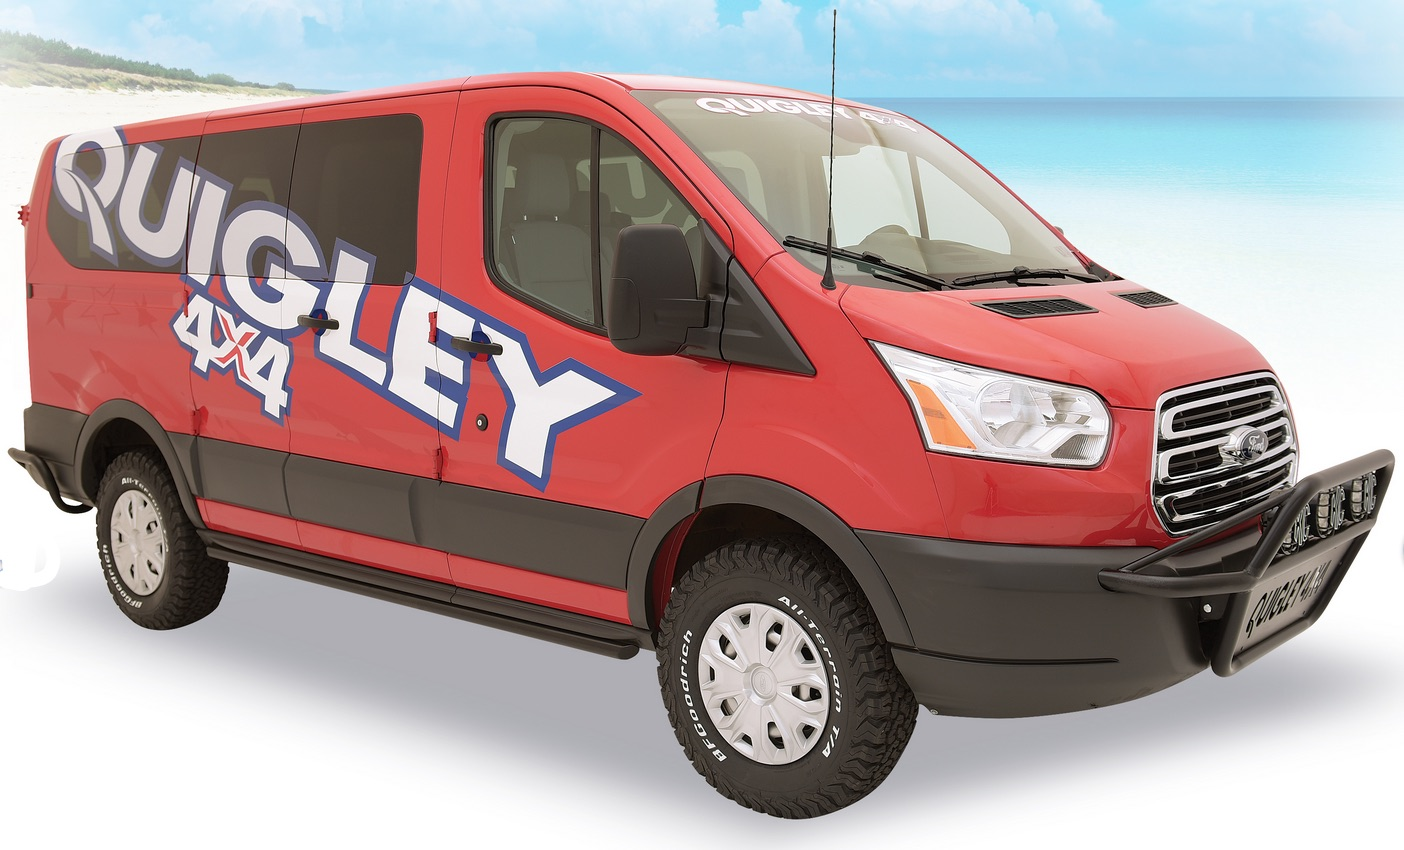 Quigley Offers 4x4 Conversion for Ford 